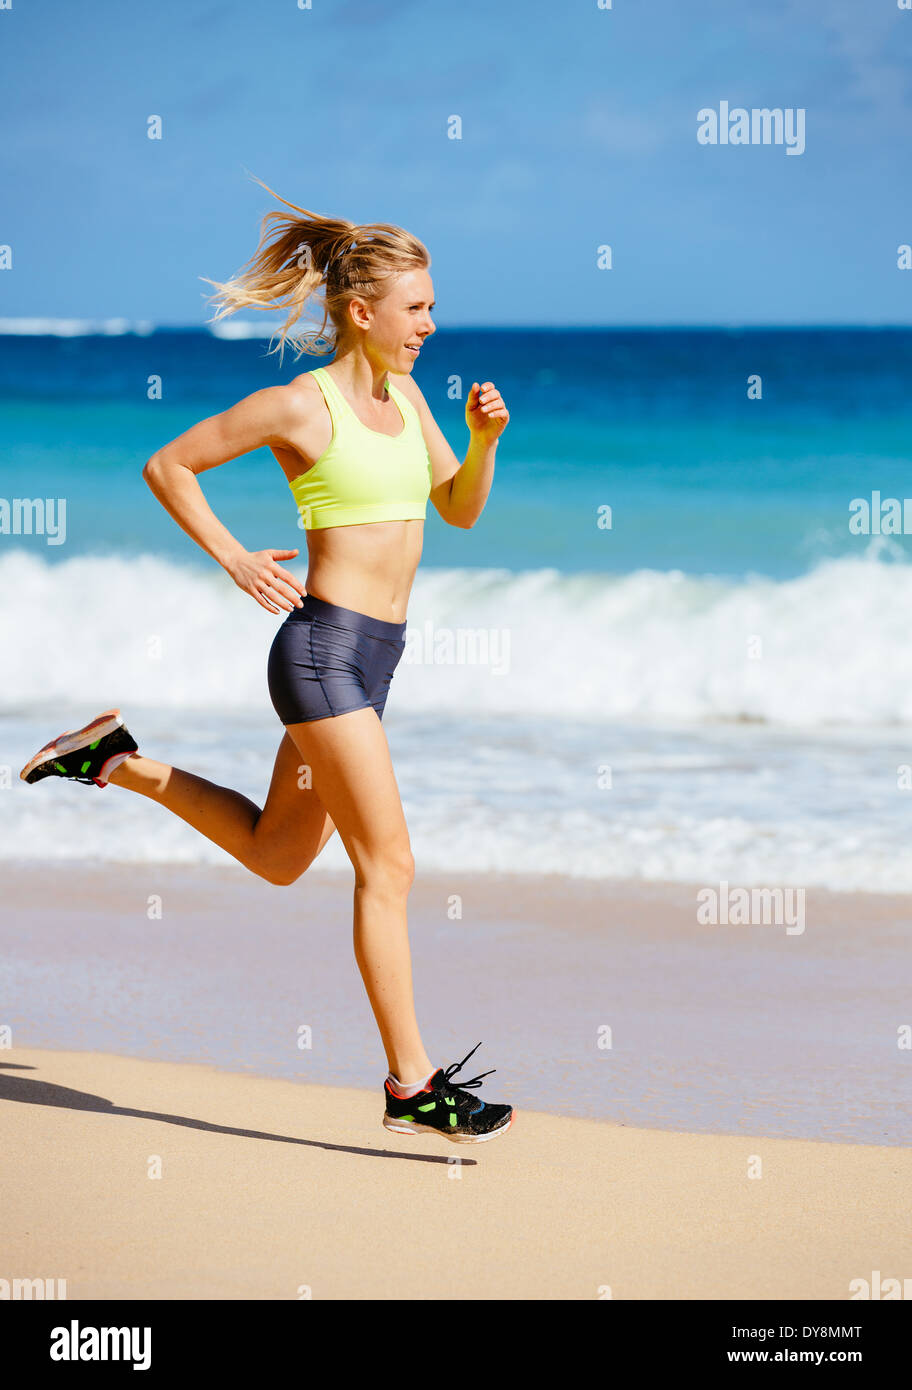 Athletic Fitness Woman Running on the Beach. Female Runner Jogging. Outdoor Workout. Fitness Concept. Stock Photo